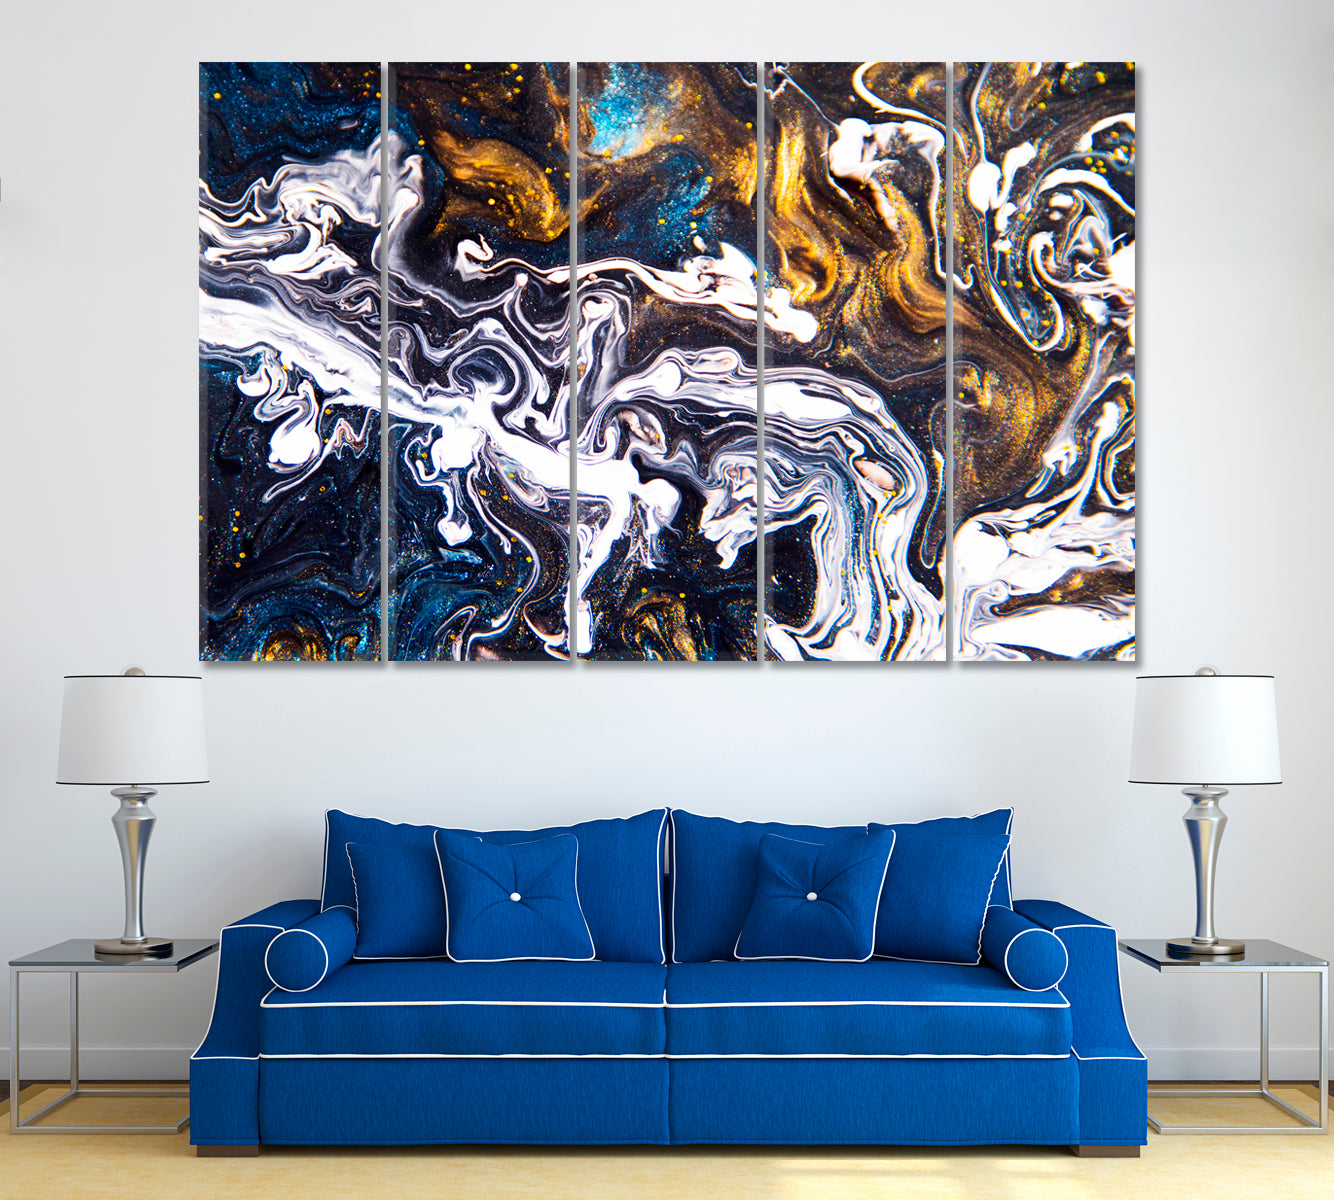 Abstract Acrylic Fluid Painting Canvas Print ArtLexy 5 Panels 36"x24" inches 